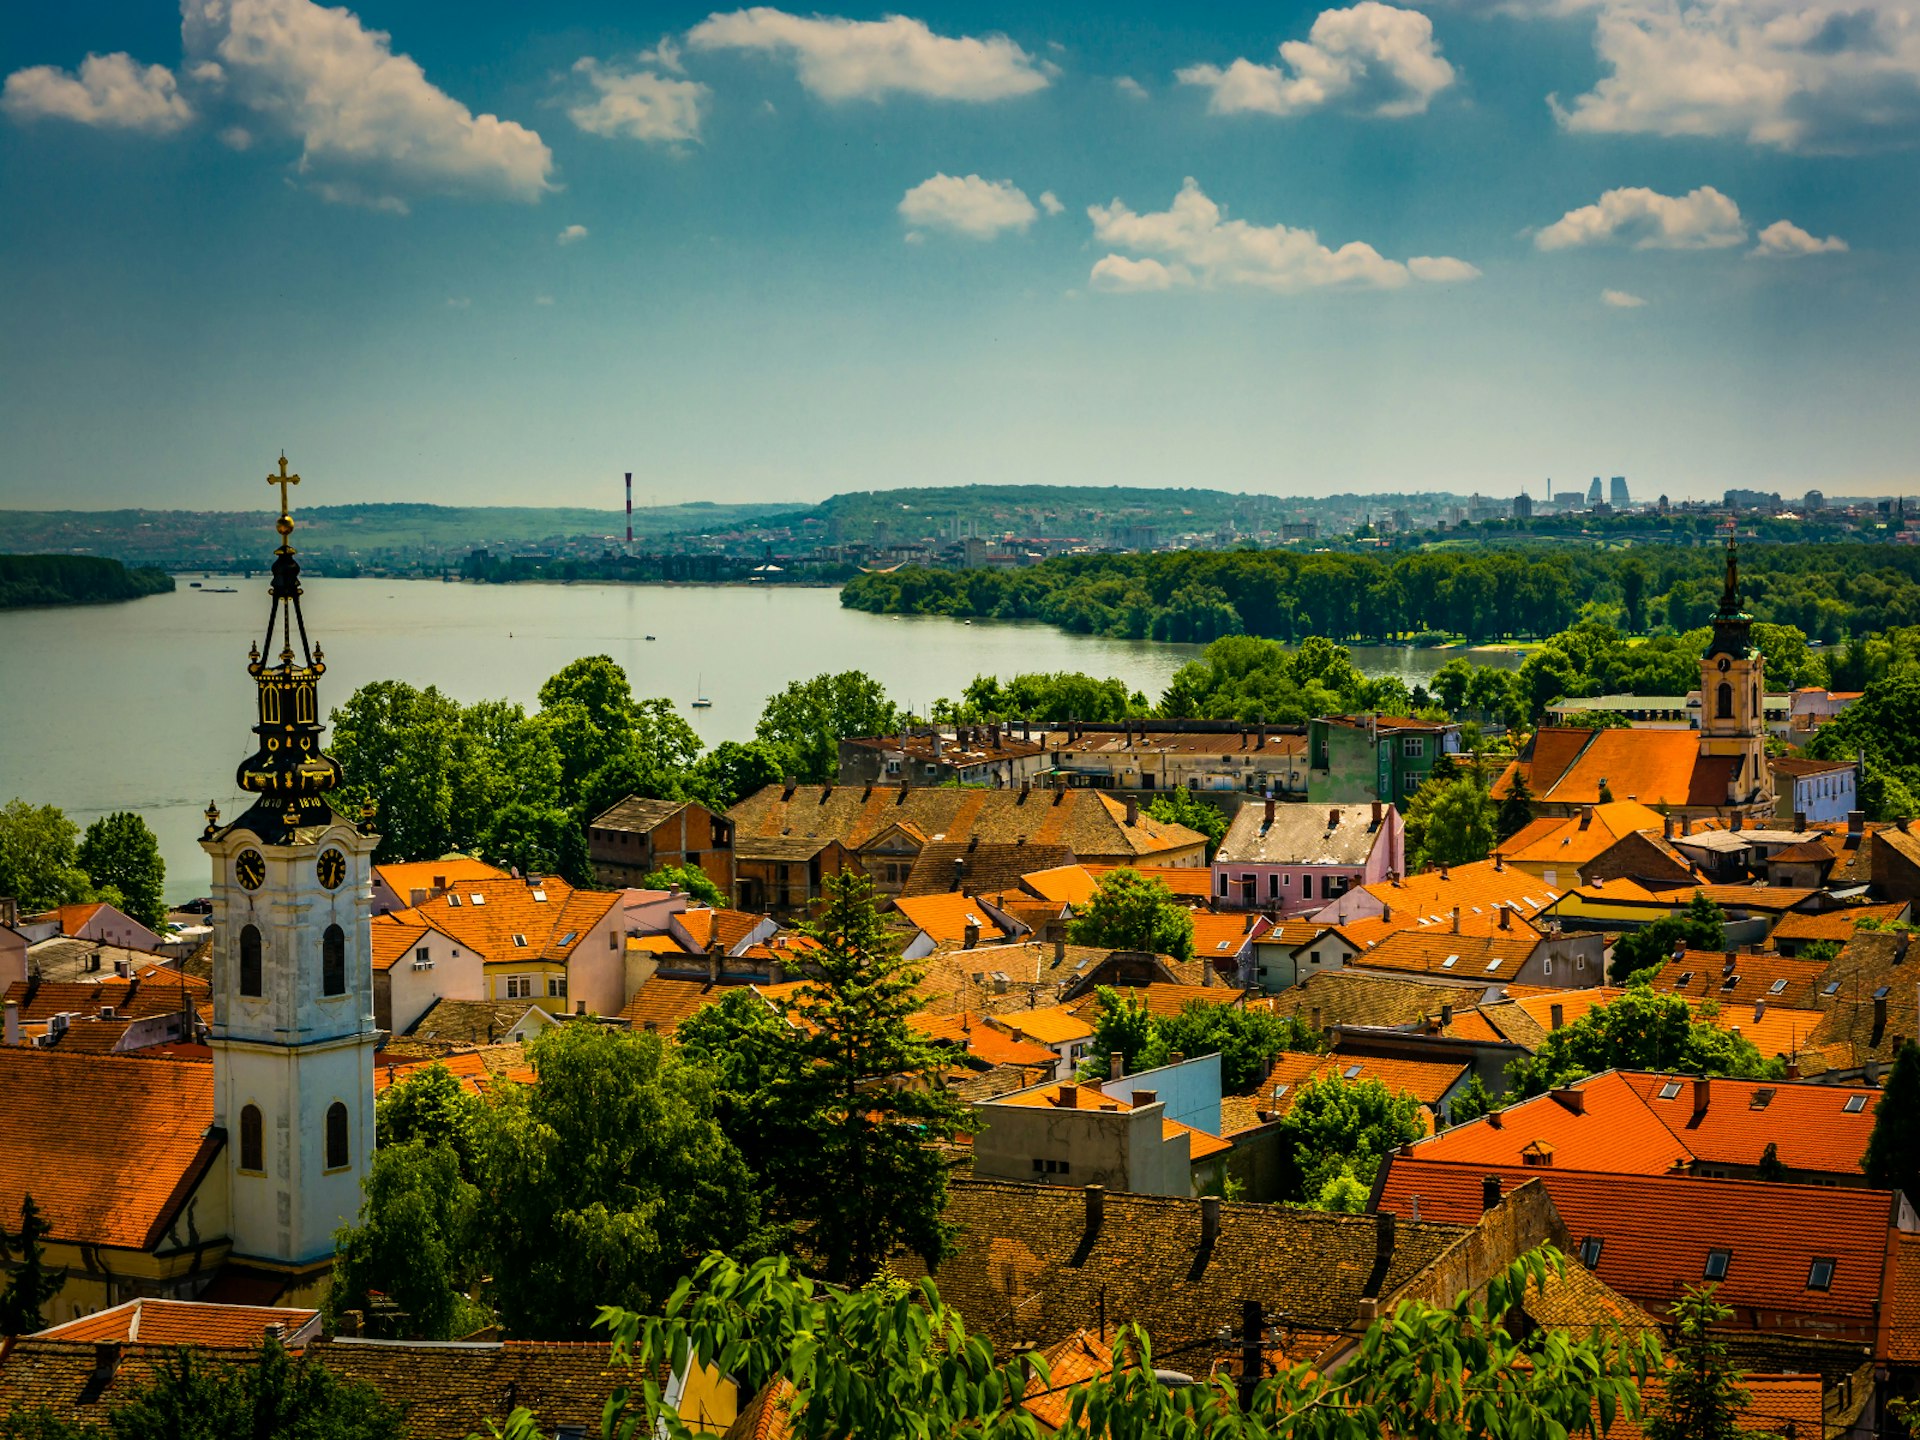 View over the orange rooftops of the Zemun district of Belgrade; there are also trees, a church with a black and gold spire, and the River Danube beyond.